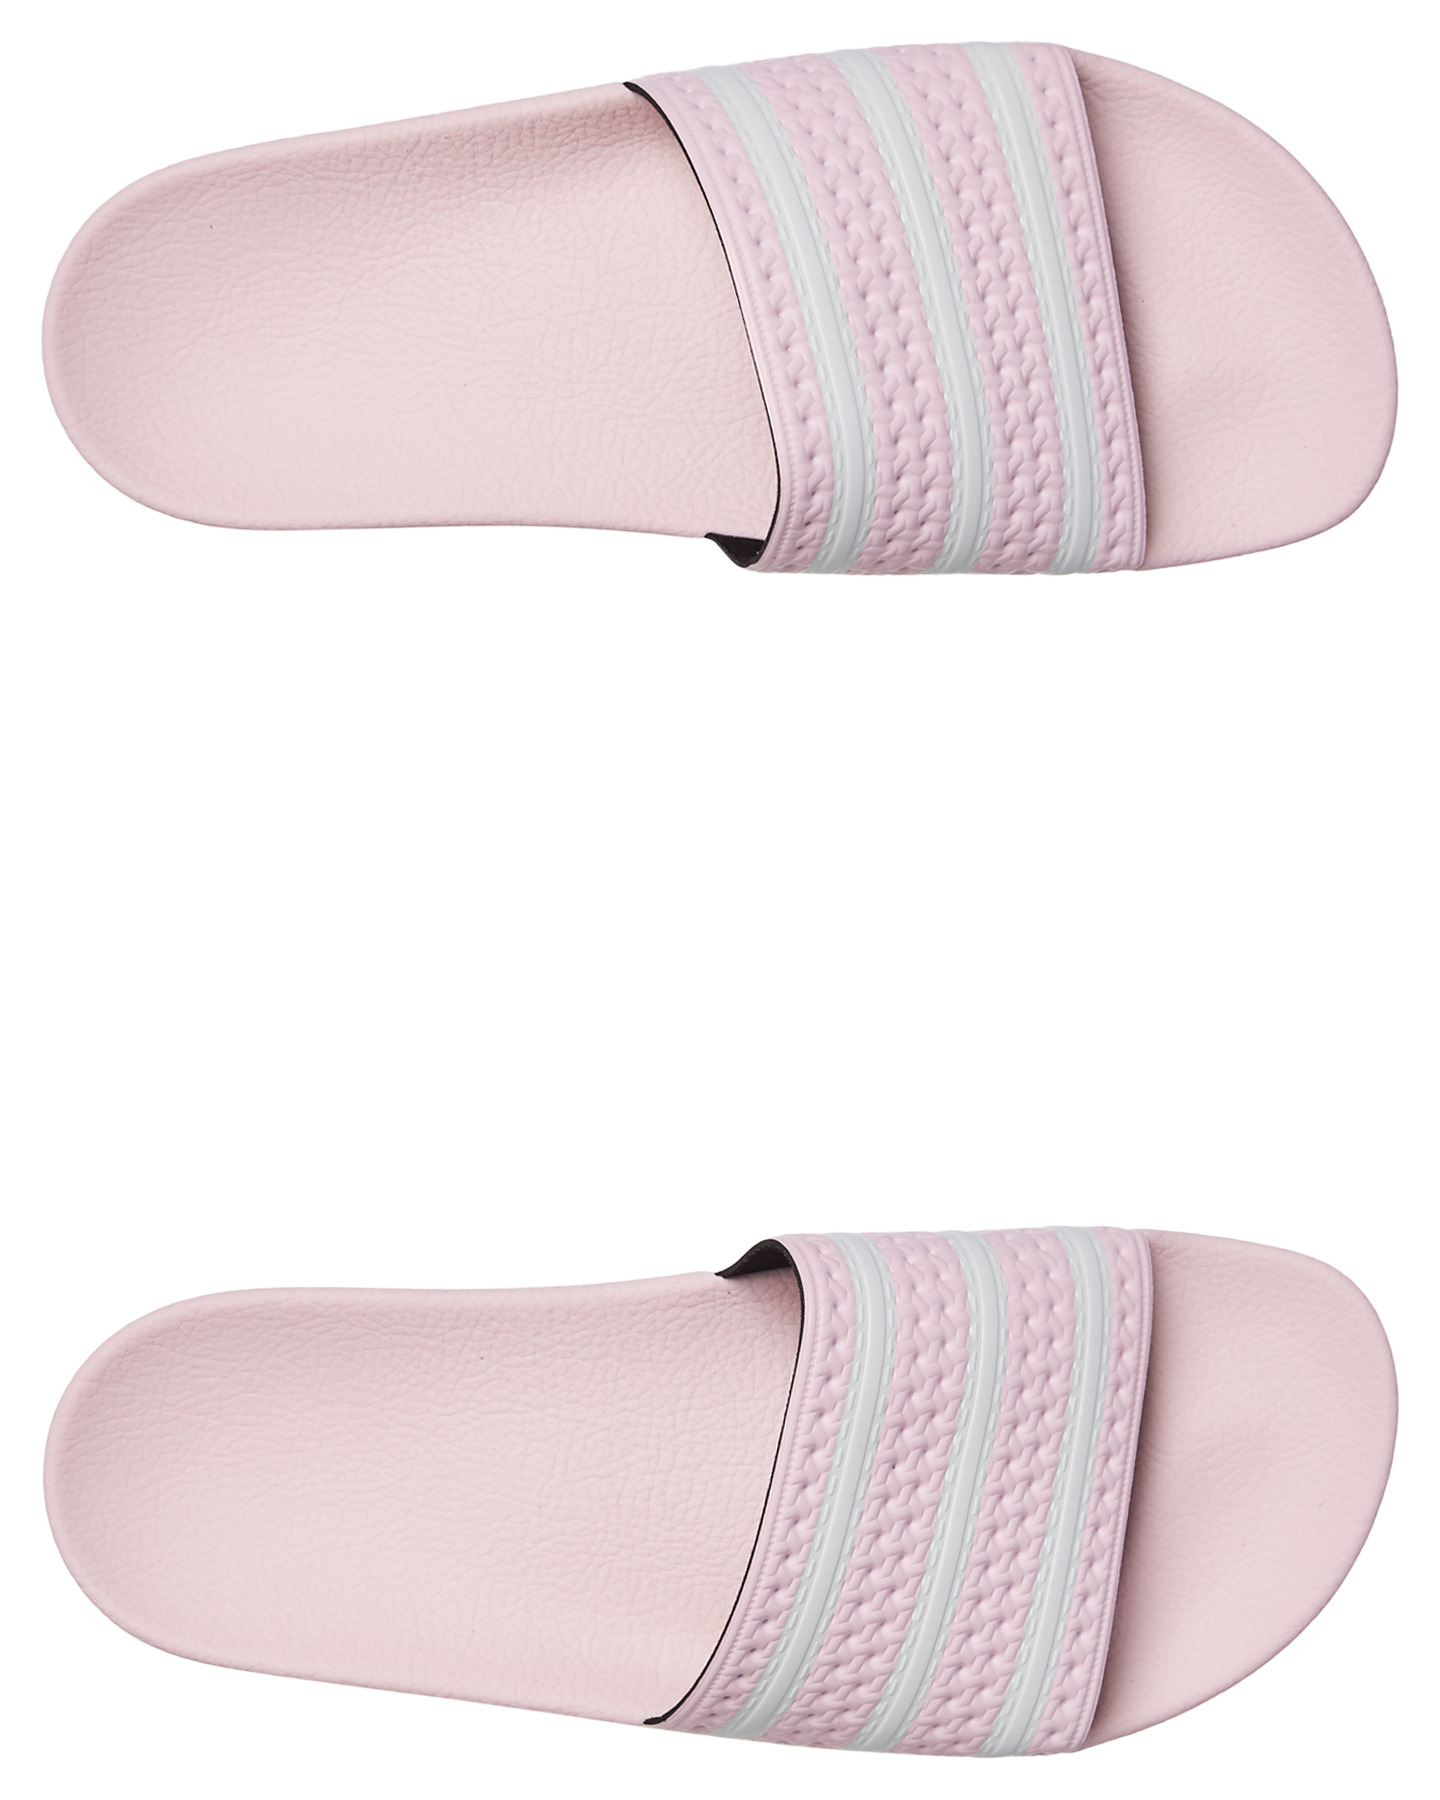 pink and white adidas sliders